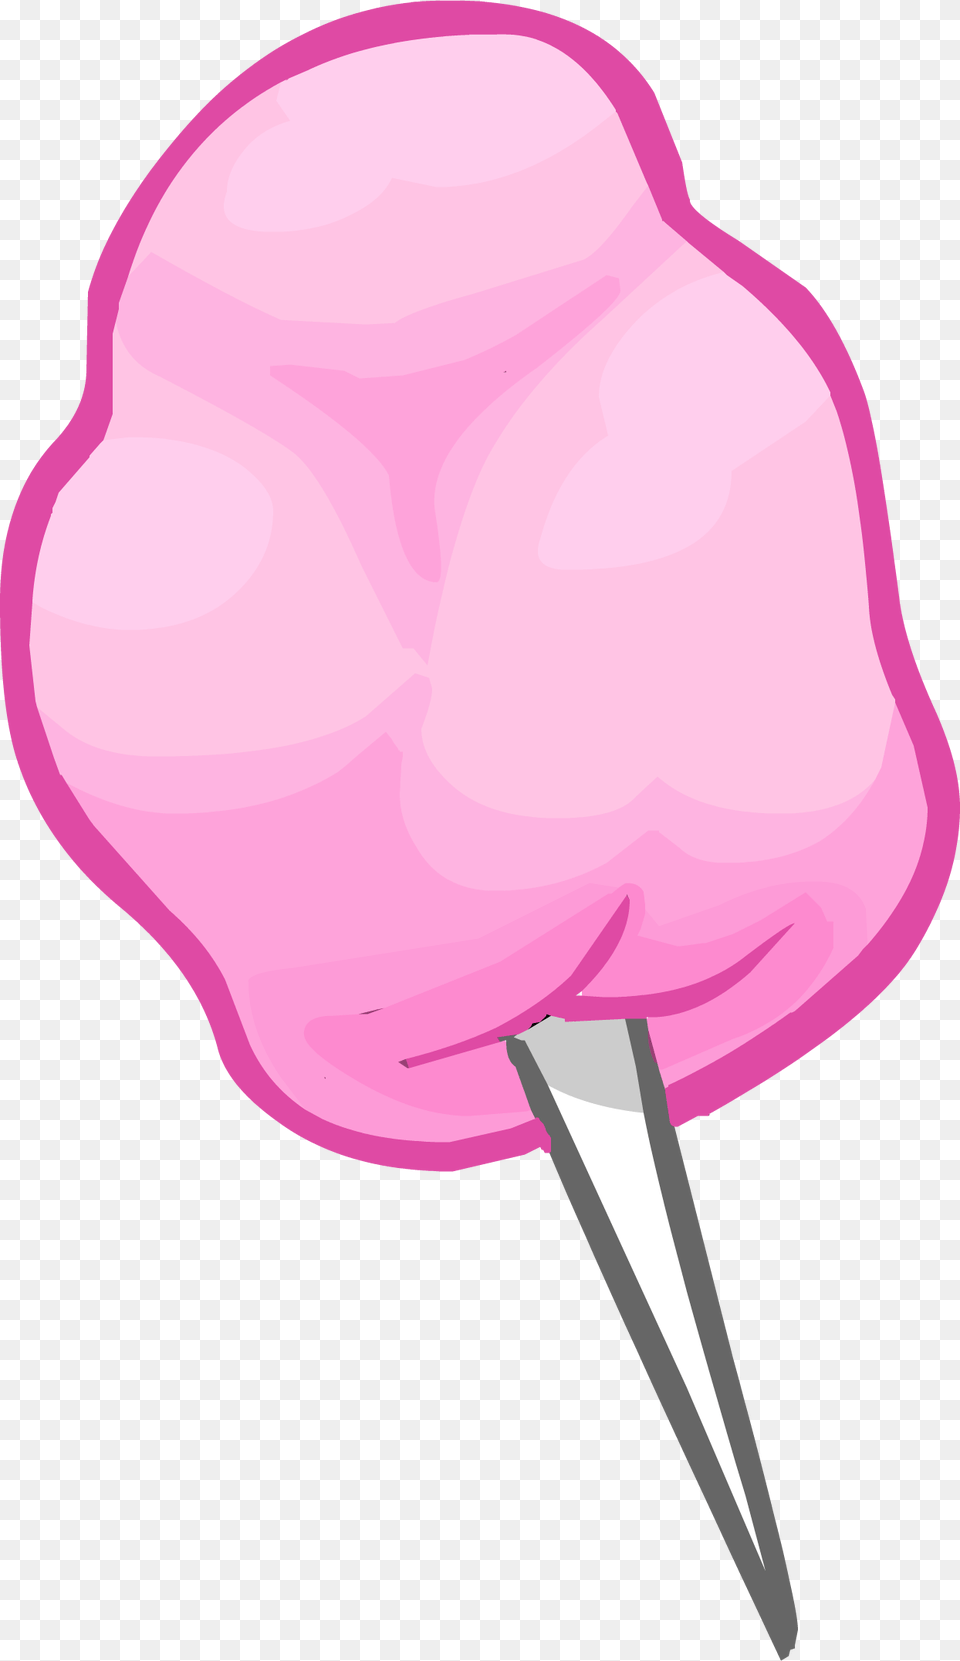 Cotton Candy Clipart 2 Cartoon Pink Cotton Candy, Food, Sweets, Person, Adult Png